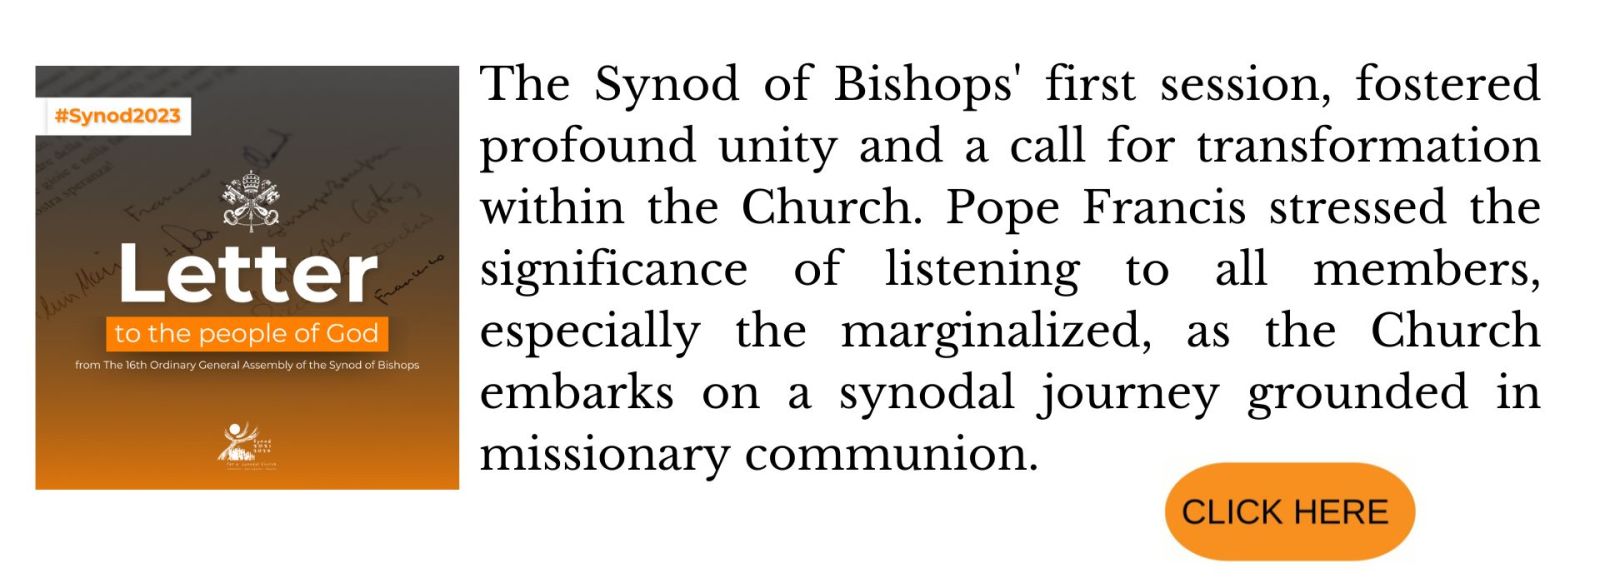 What would you want to say at the Synod?